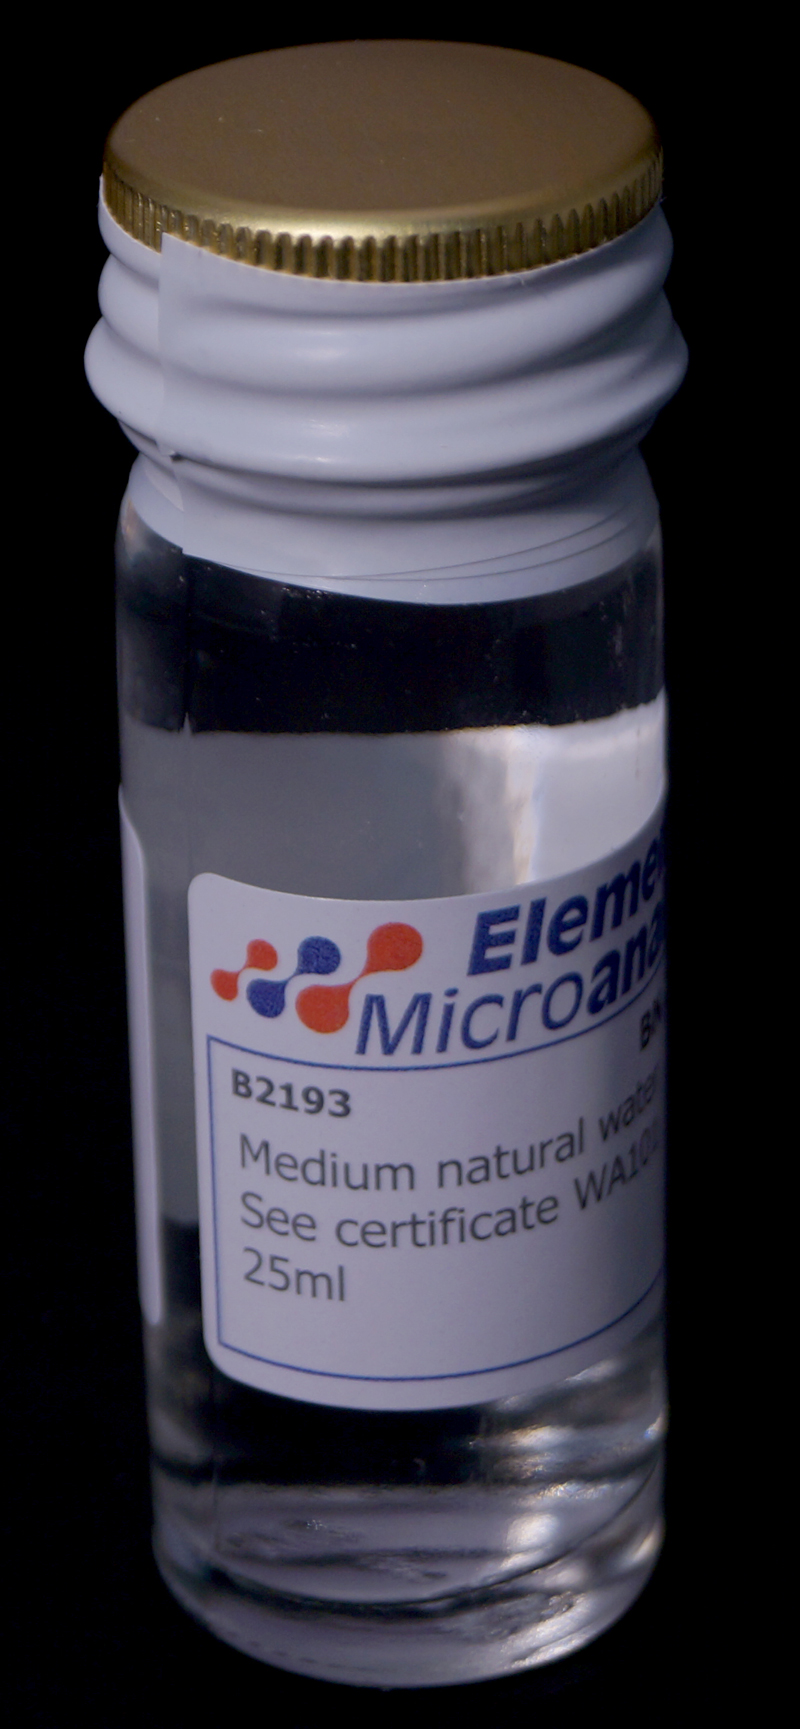 2H-and-18O-isotope-IRMS-standard-Medium-natural-water-See-certificate-WA101C-25ml